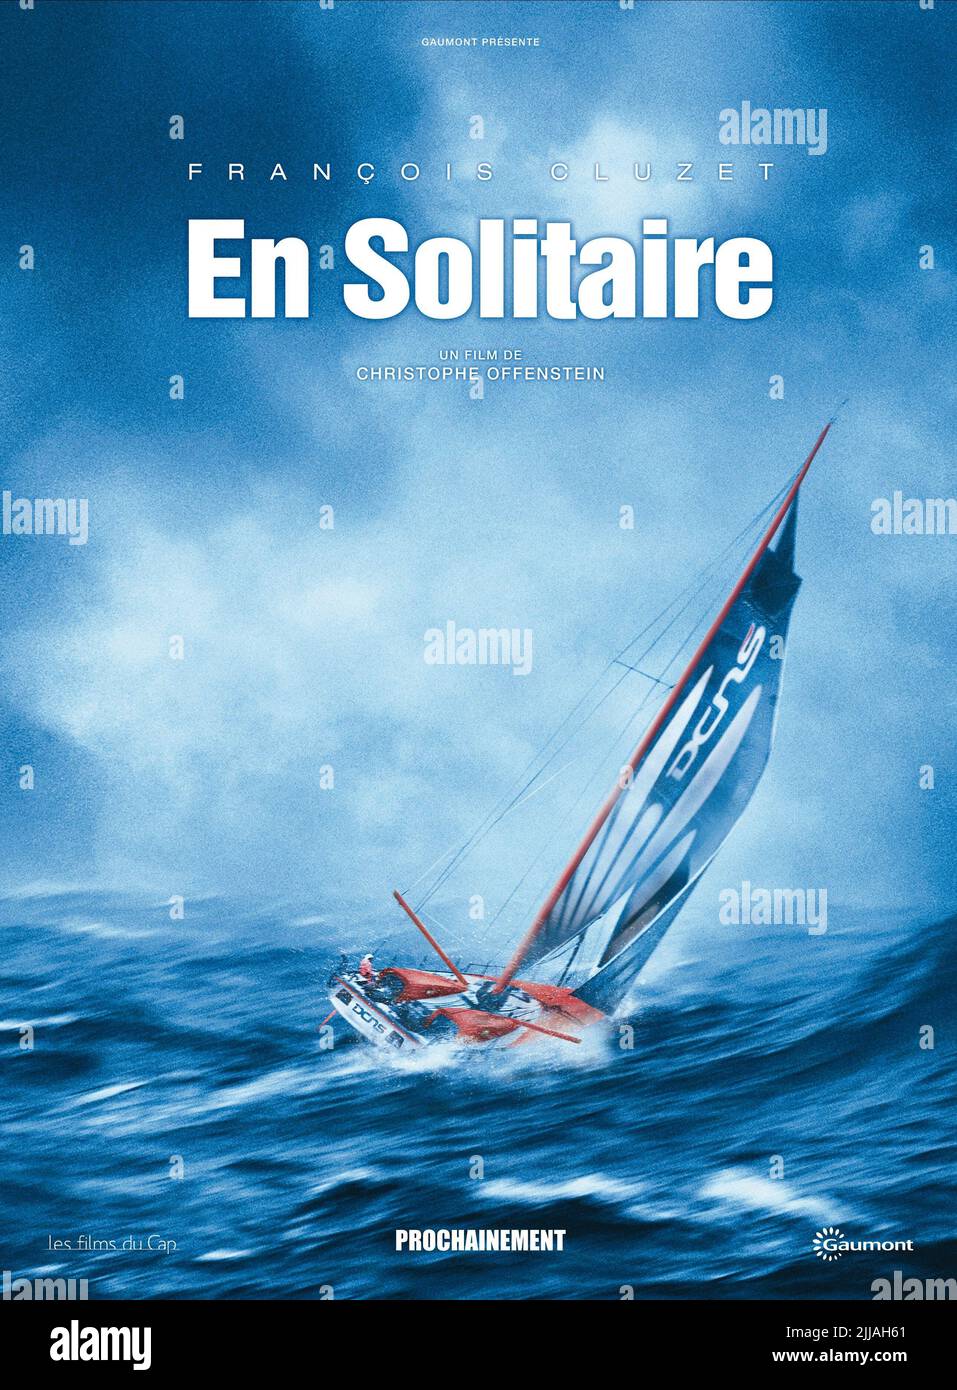 YACHT POSTER, TURNING TIDE, 2013 Stock Photo